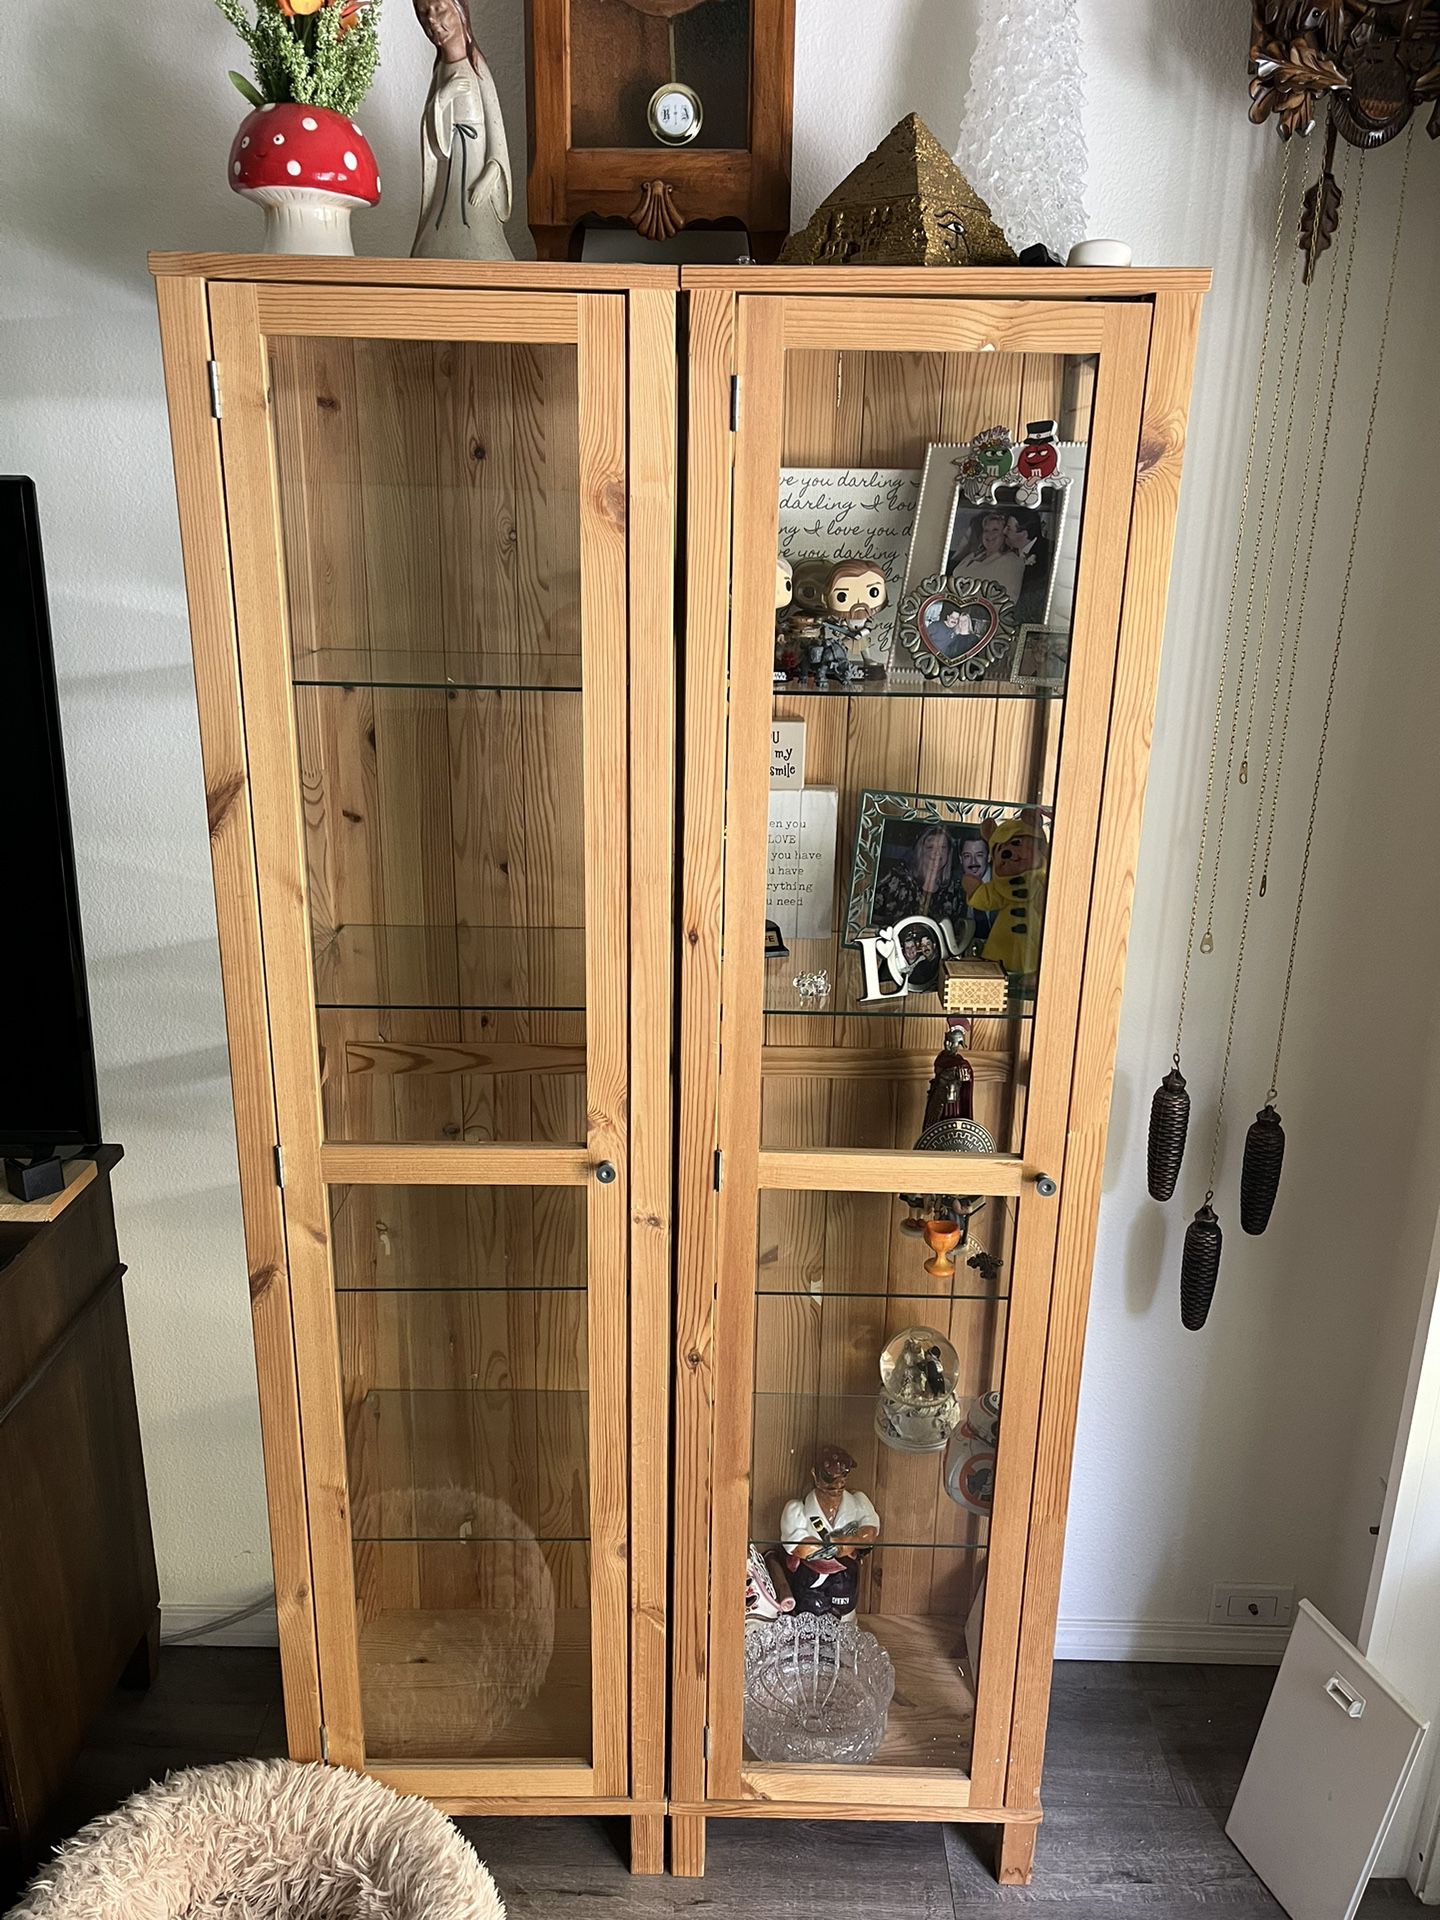 Two Display Cabinets From IKEA